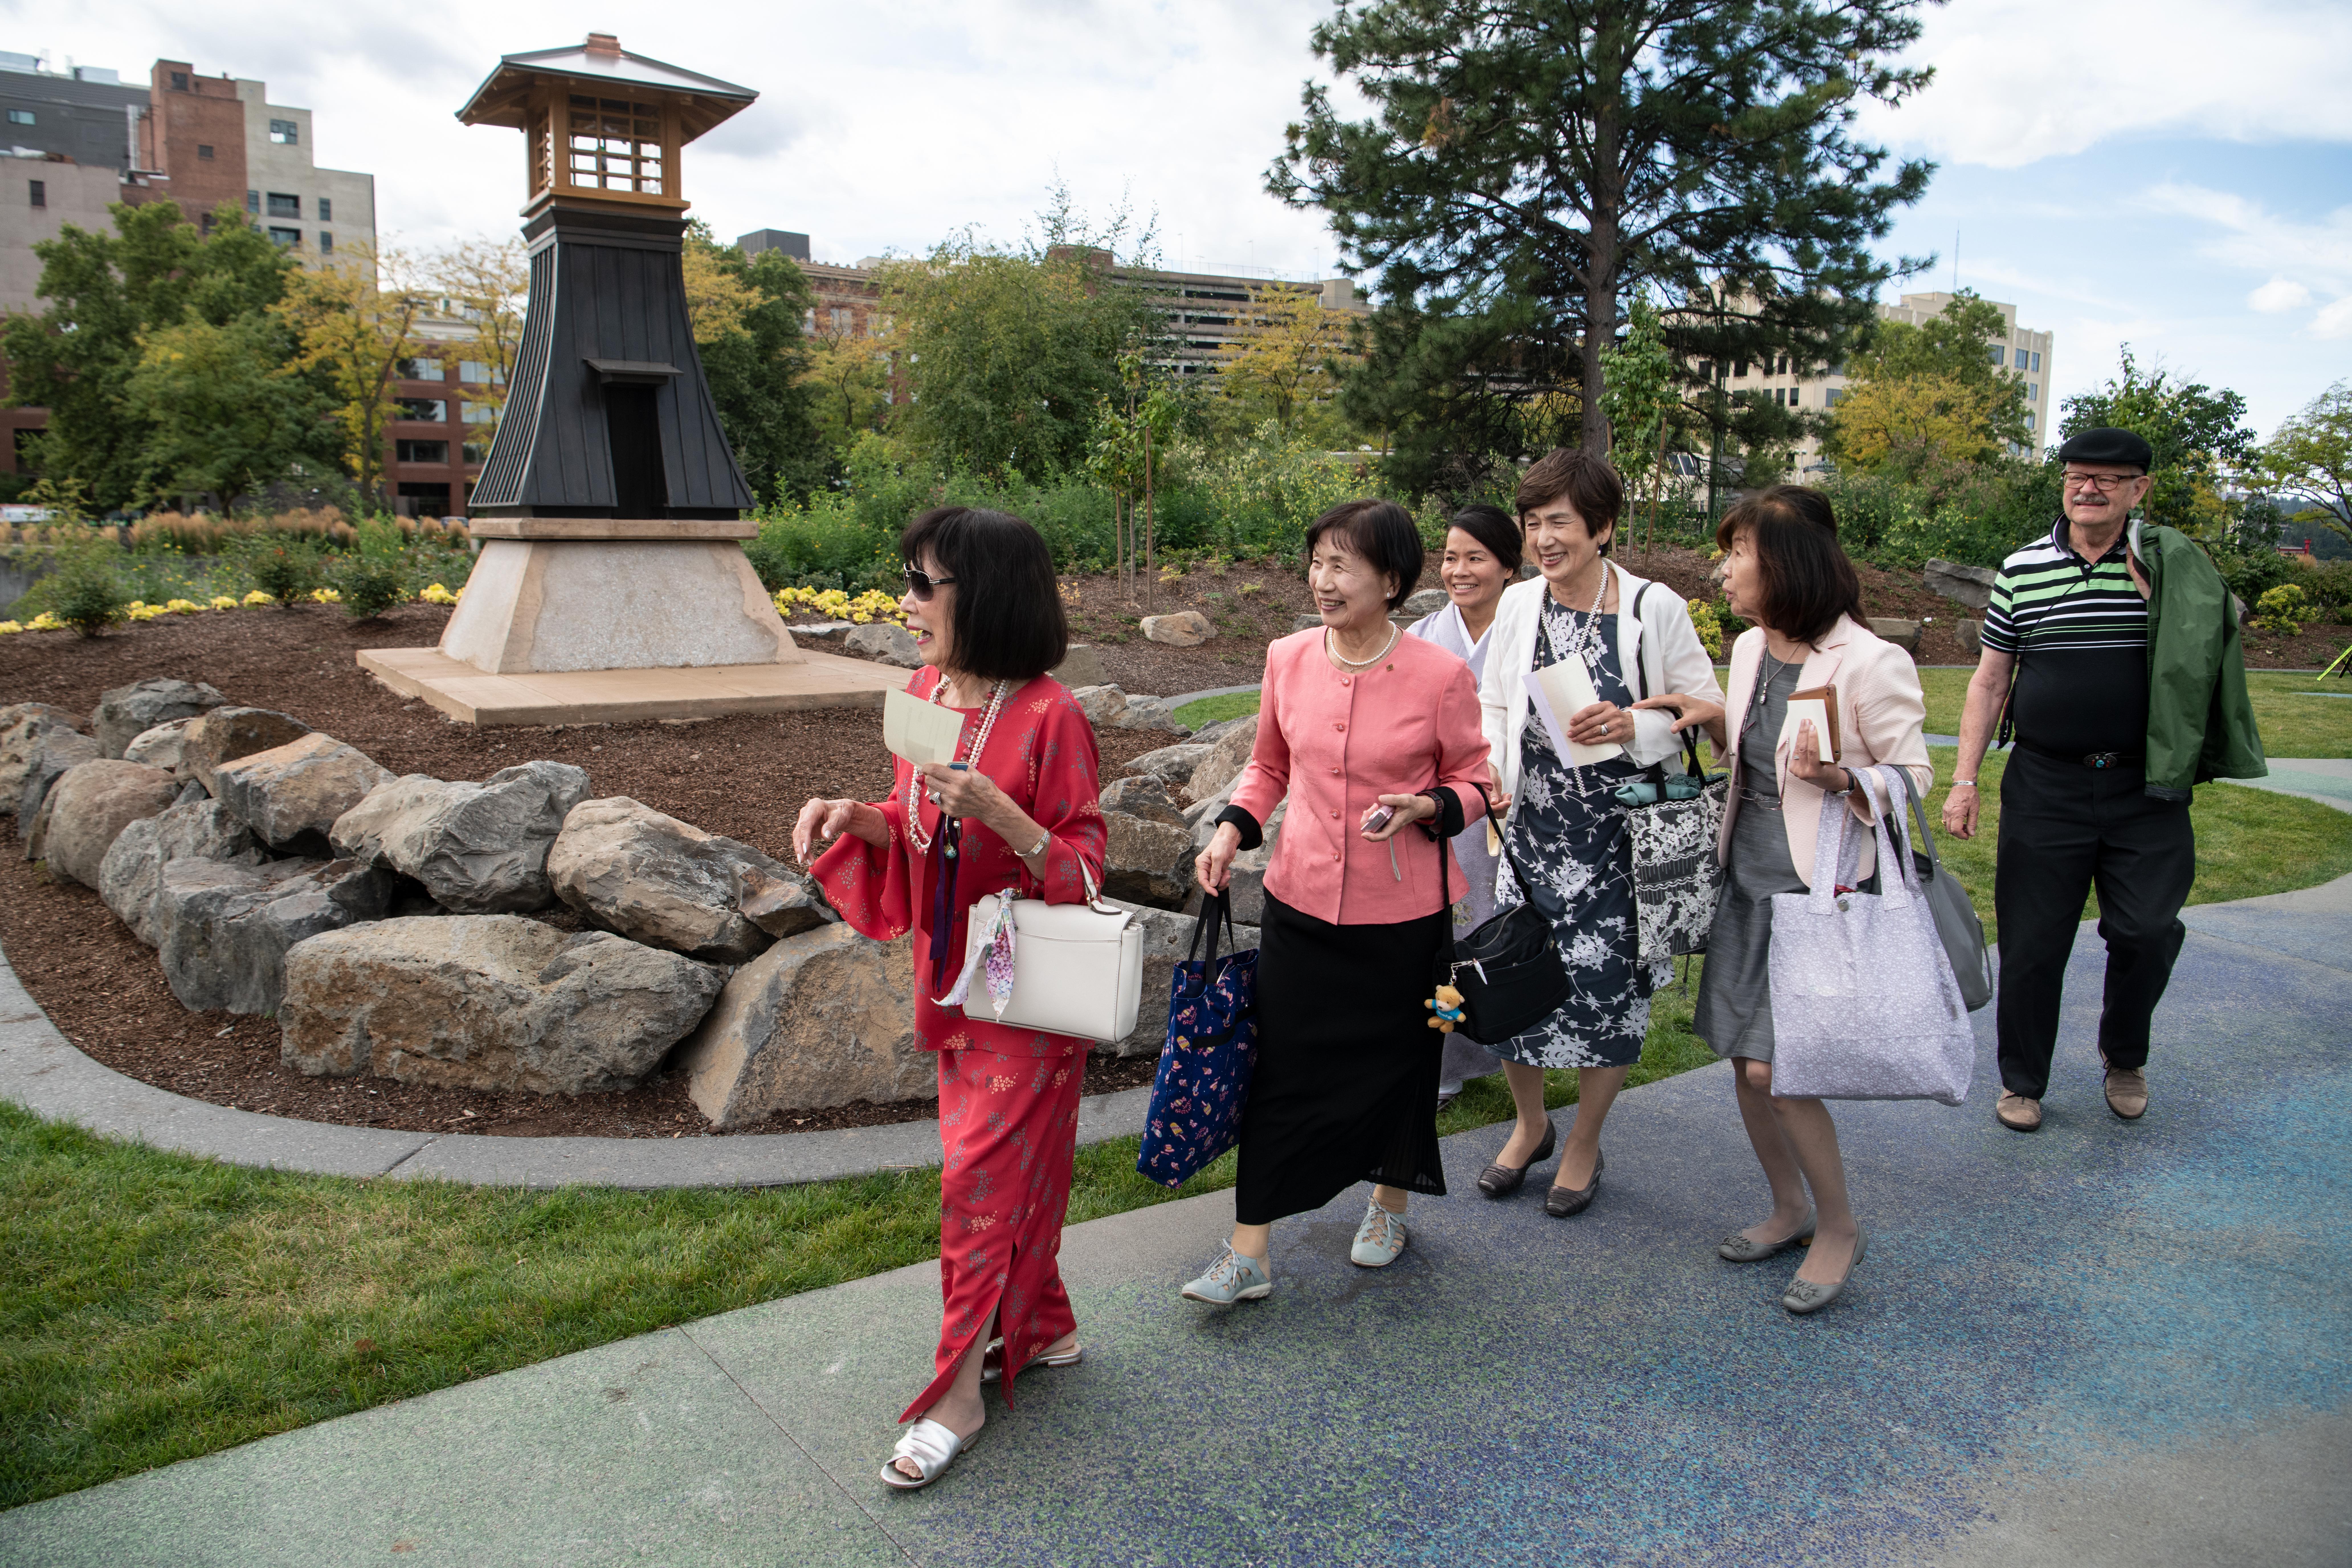 Spokane Honors Sister Cities With New Riverfront Park Garden The